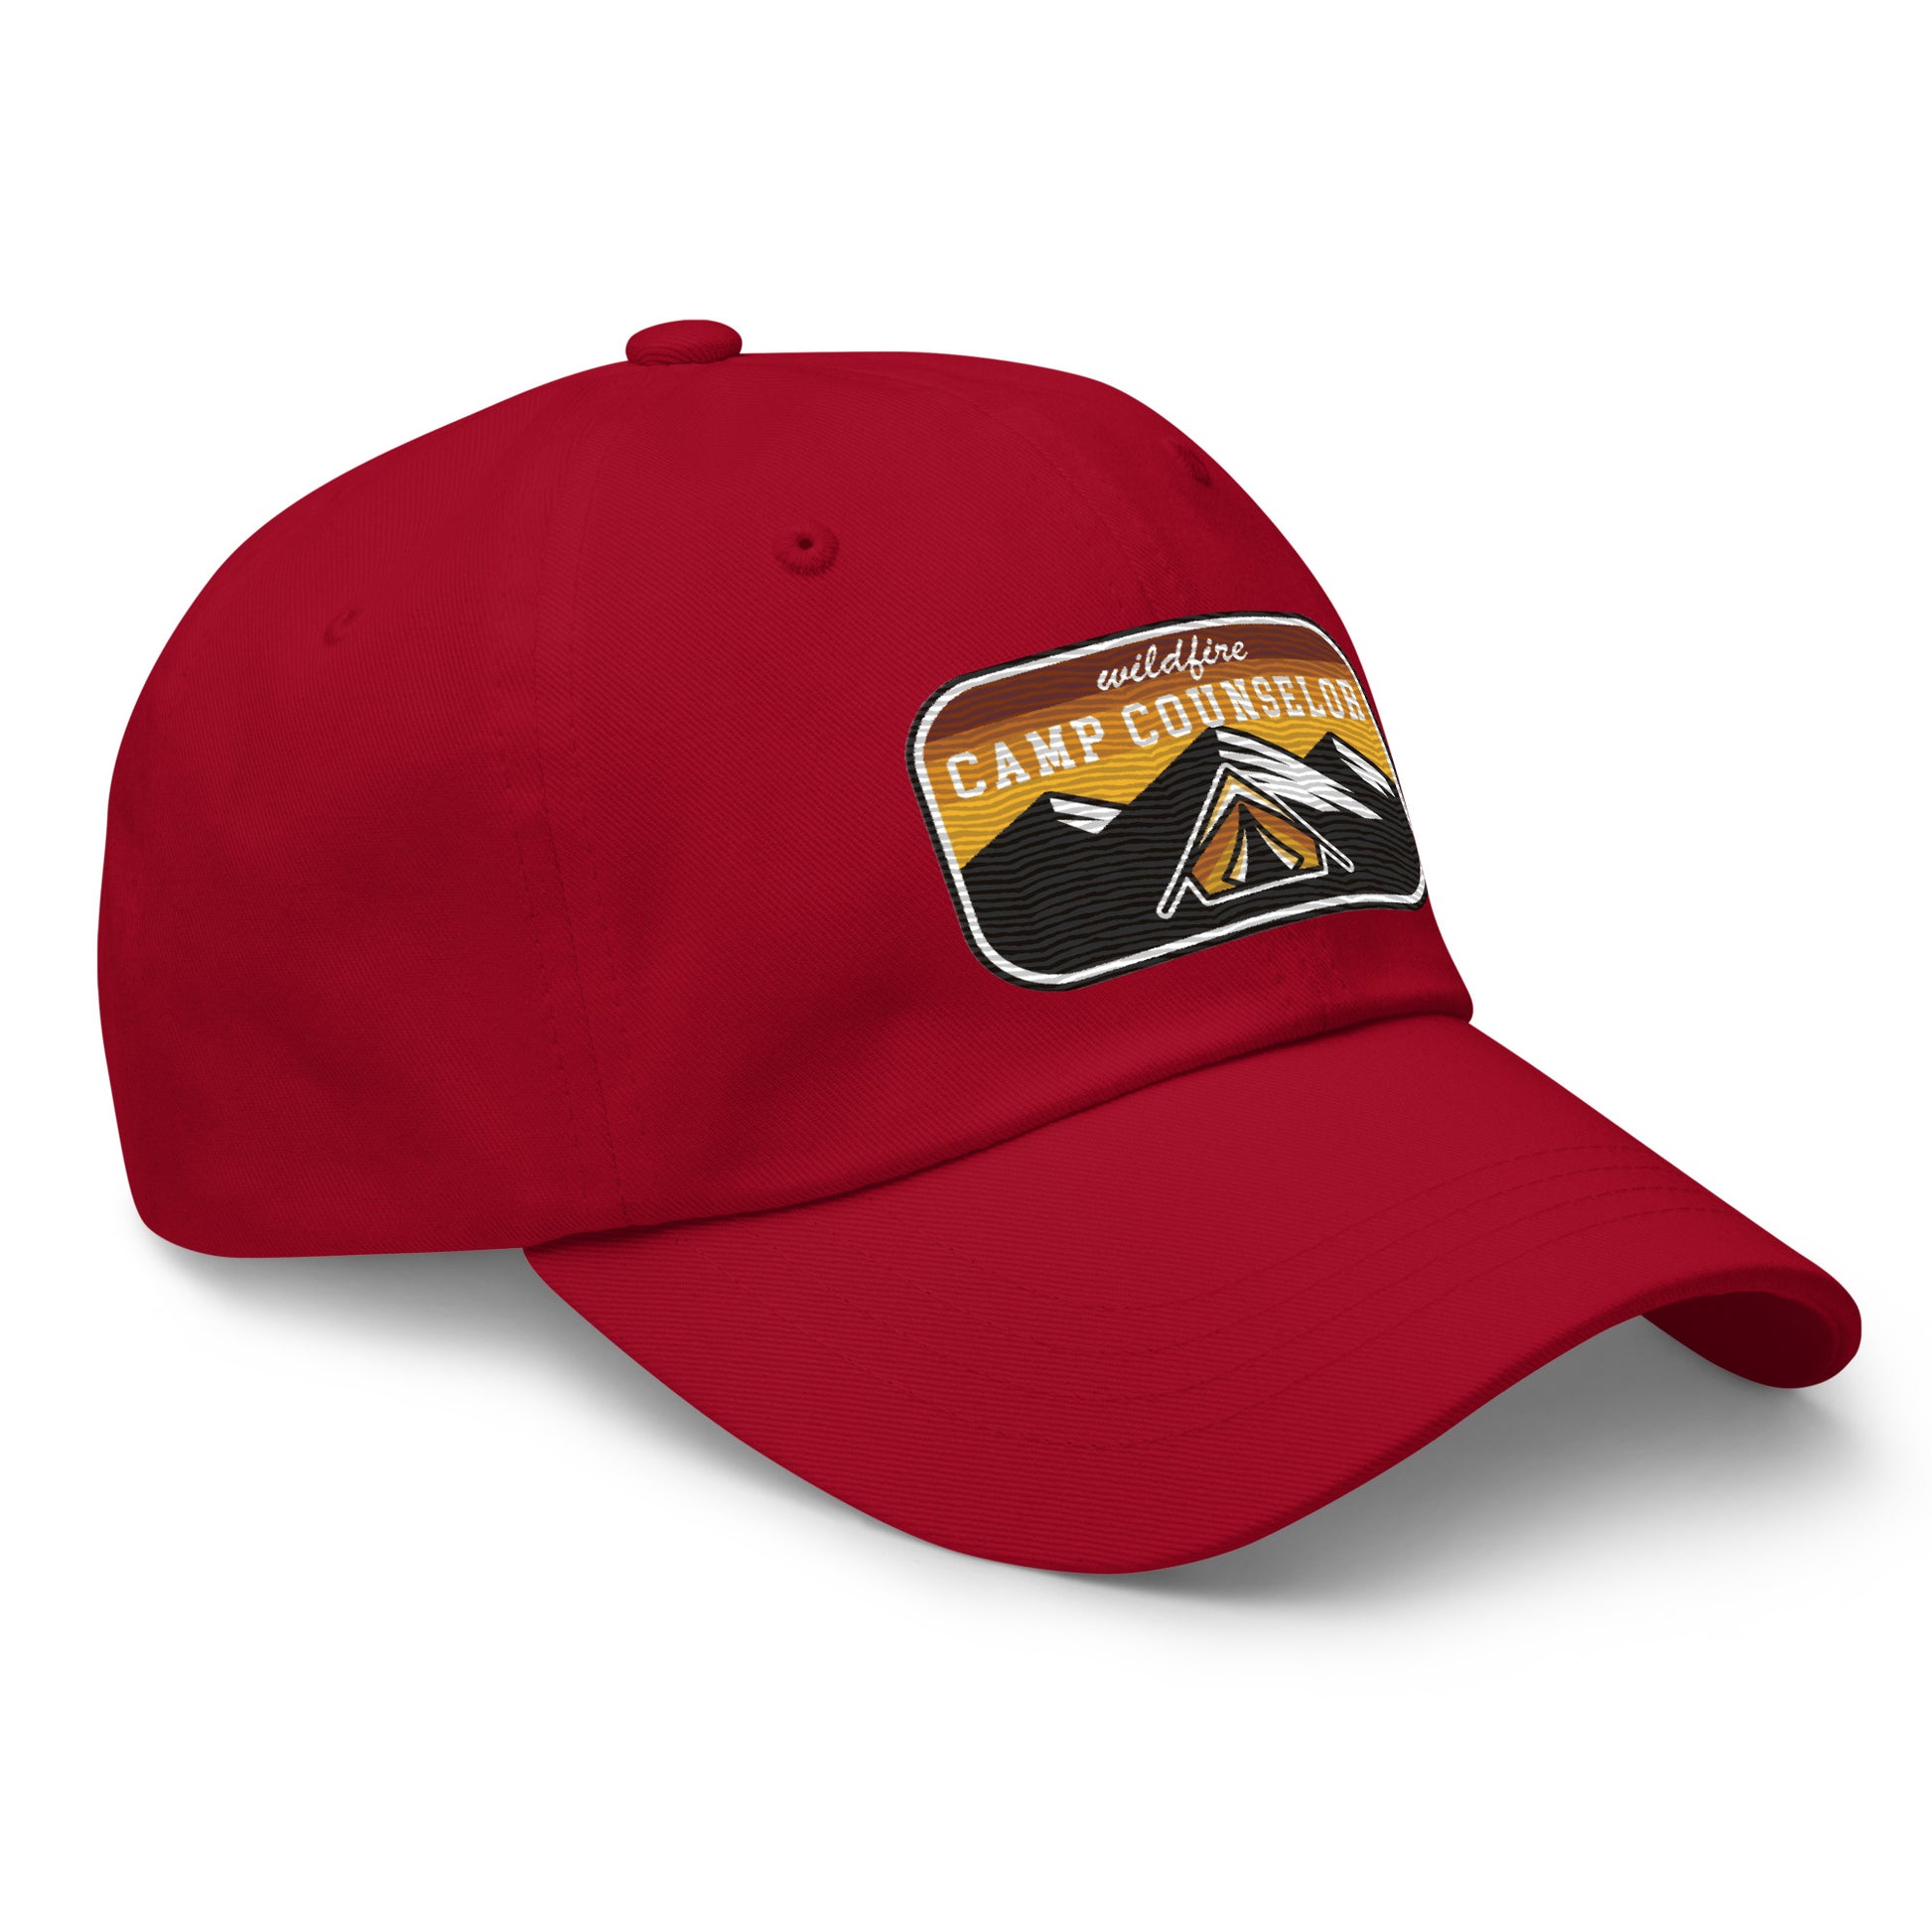 Wildfire Cigars embroidered dad hat in cranberry facing the front right